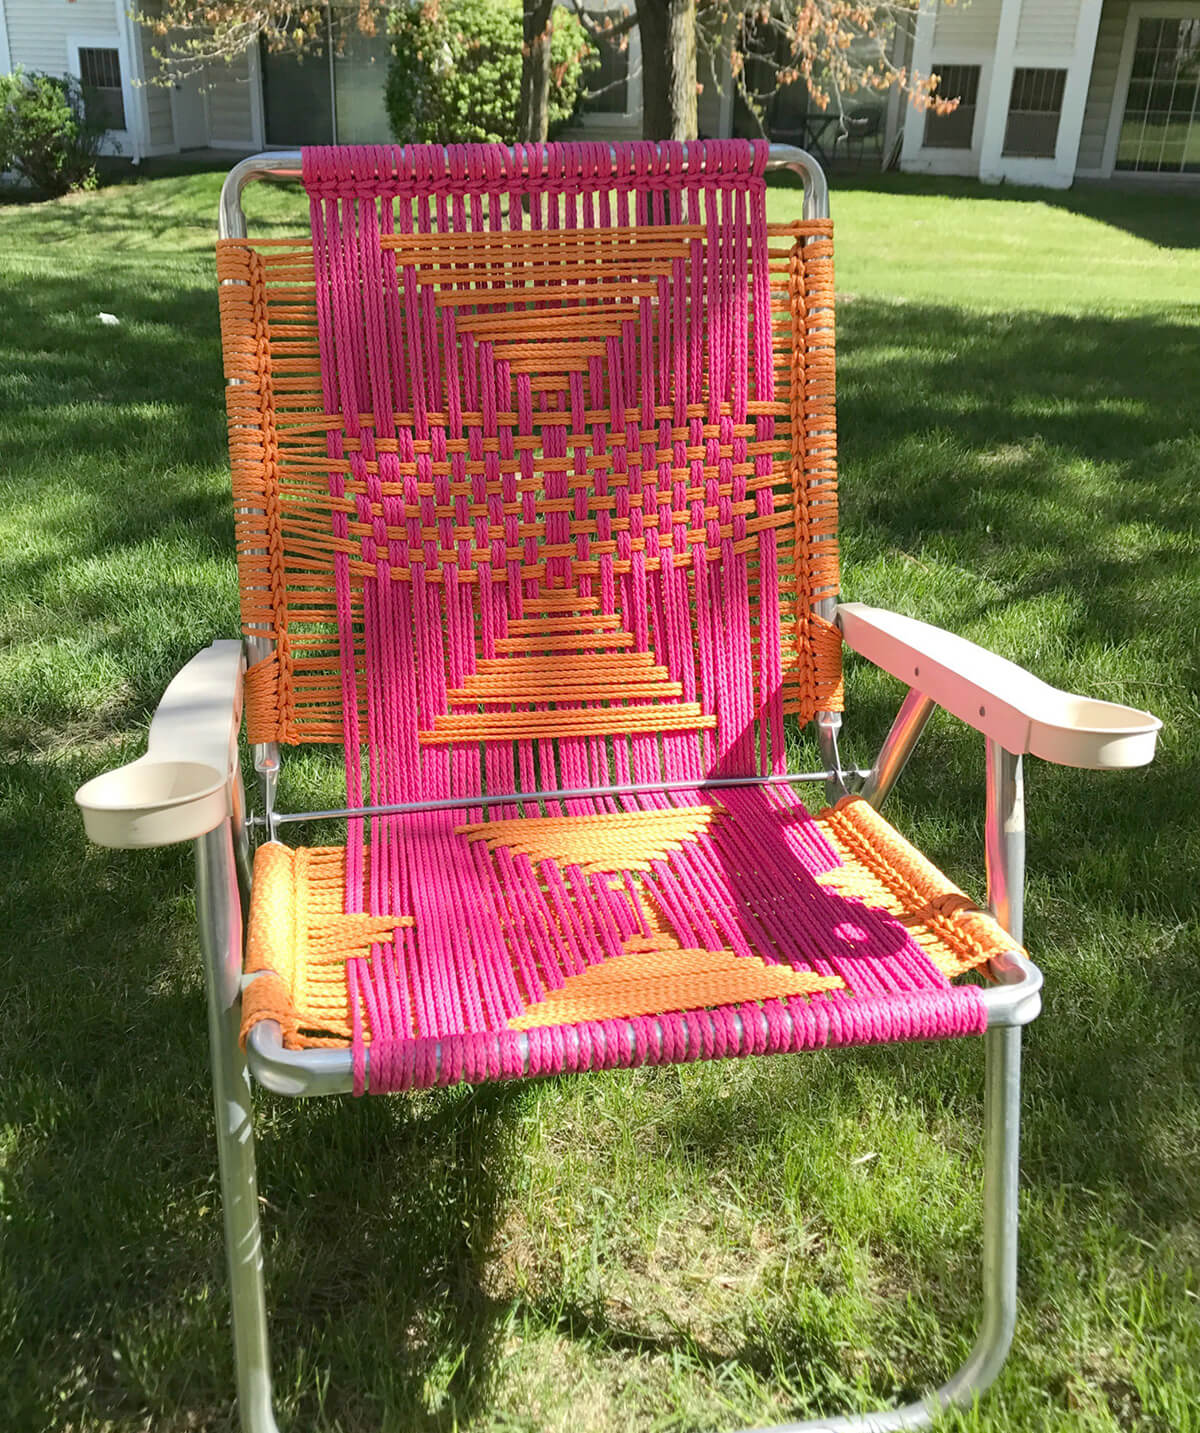 15 Super Sweet DIY Outdoor Furniture Projects For Your Patio